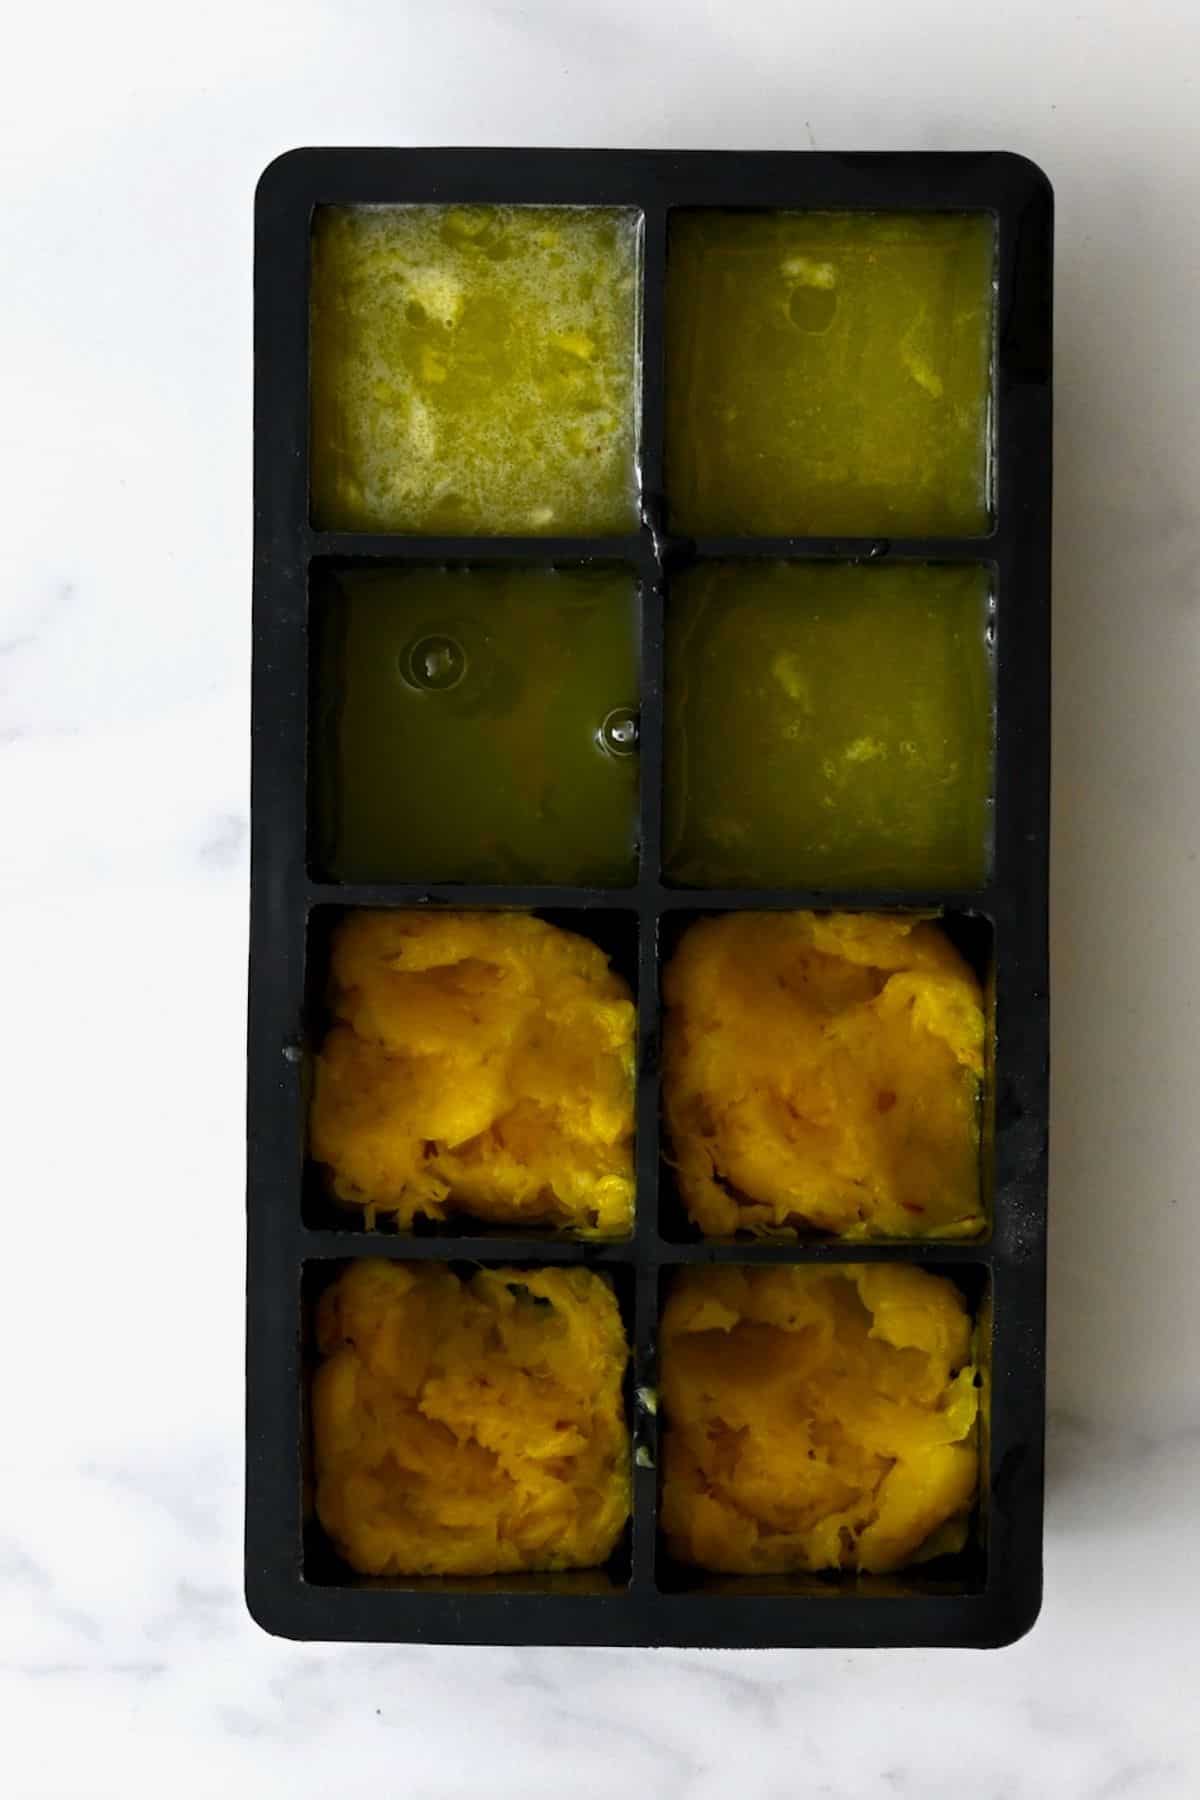 Ice cube tray with juice and pulp from pineapple